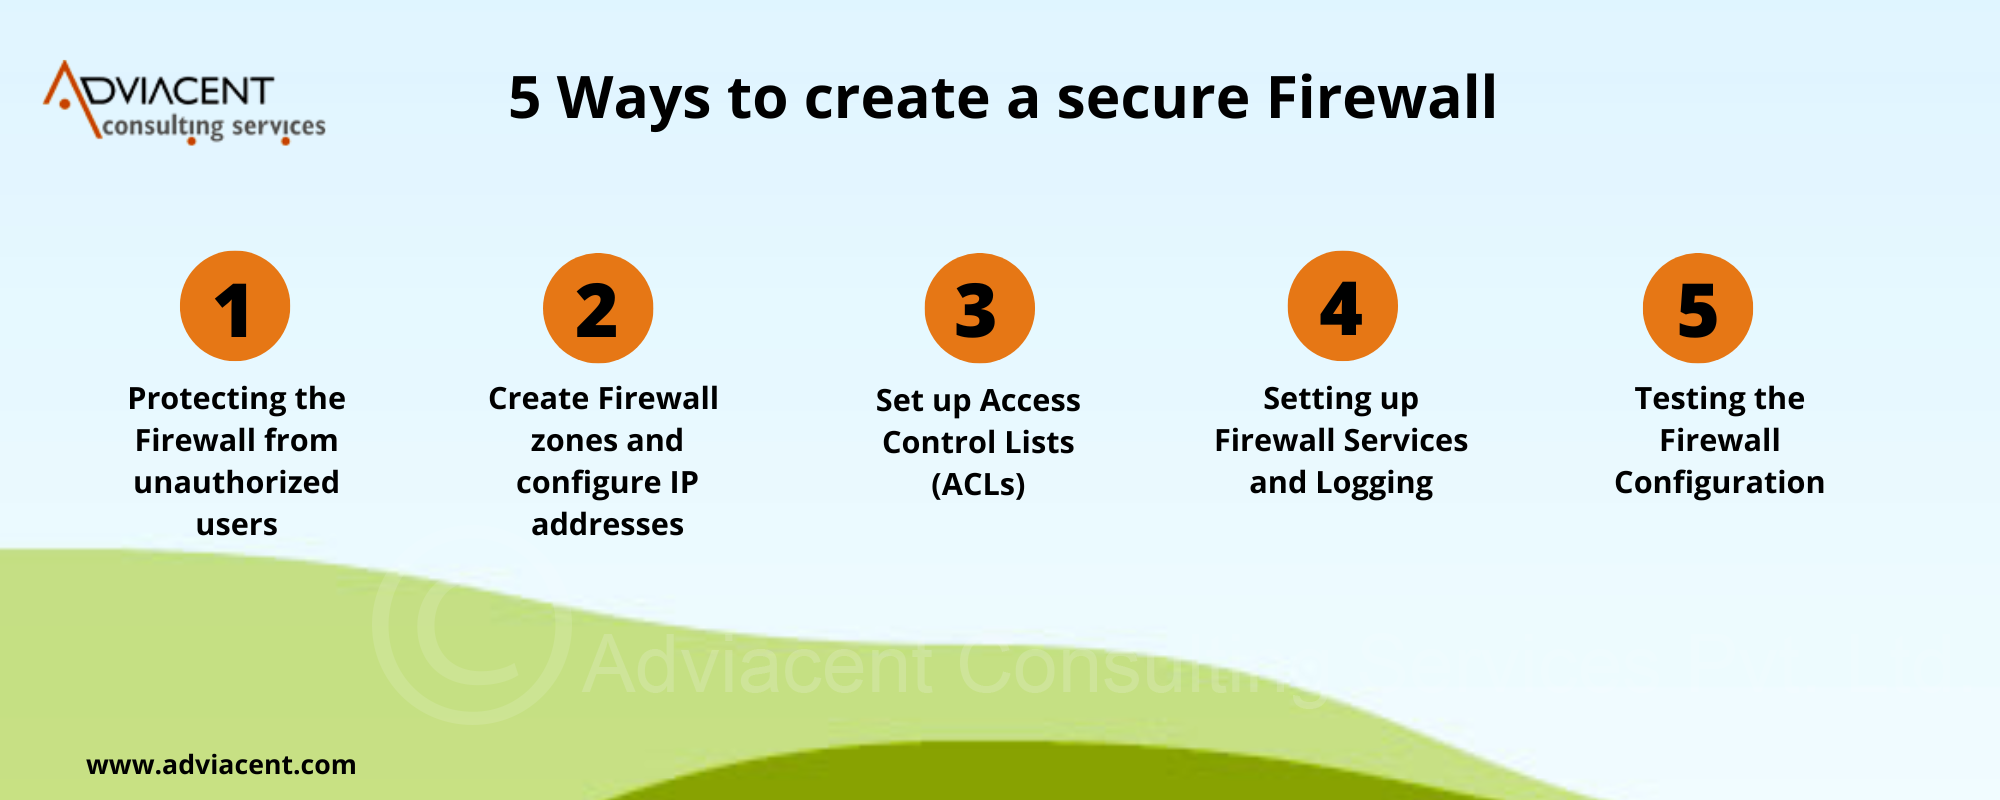 5 ways to secure firewall